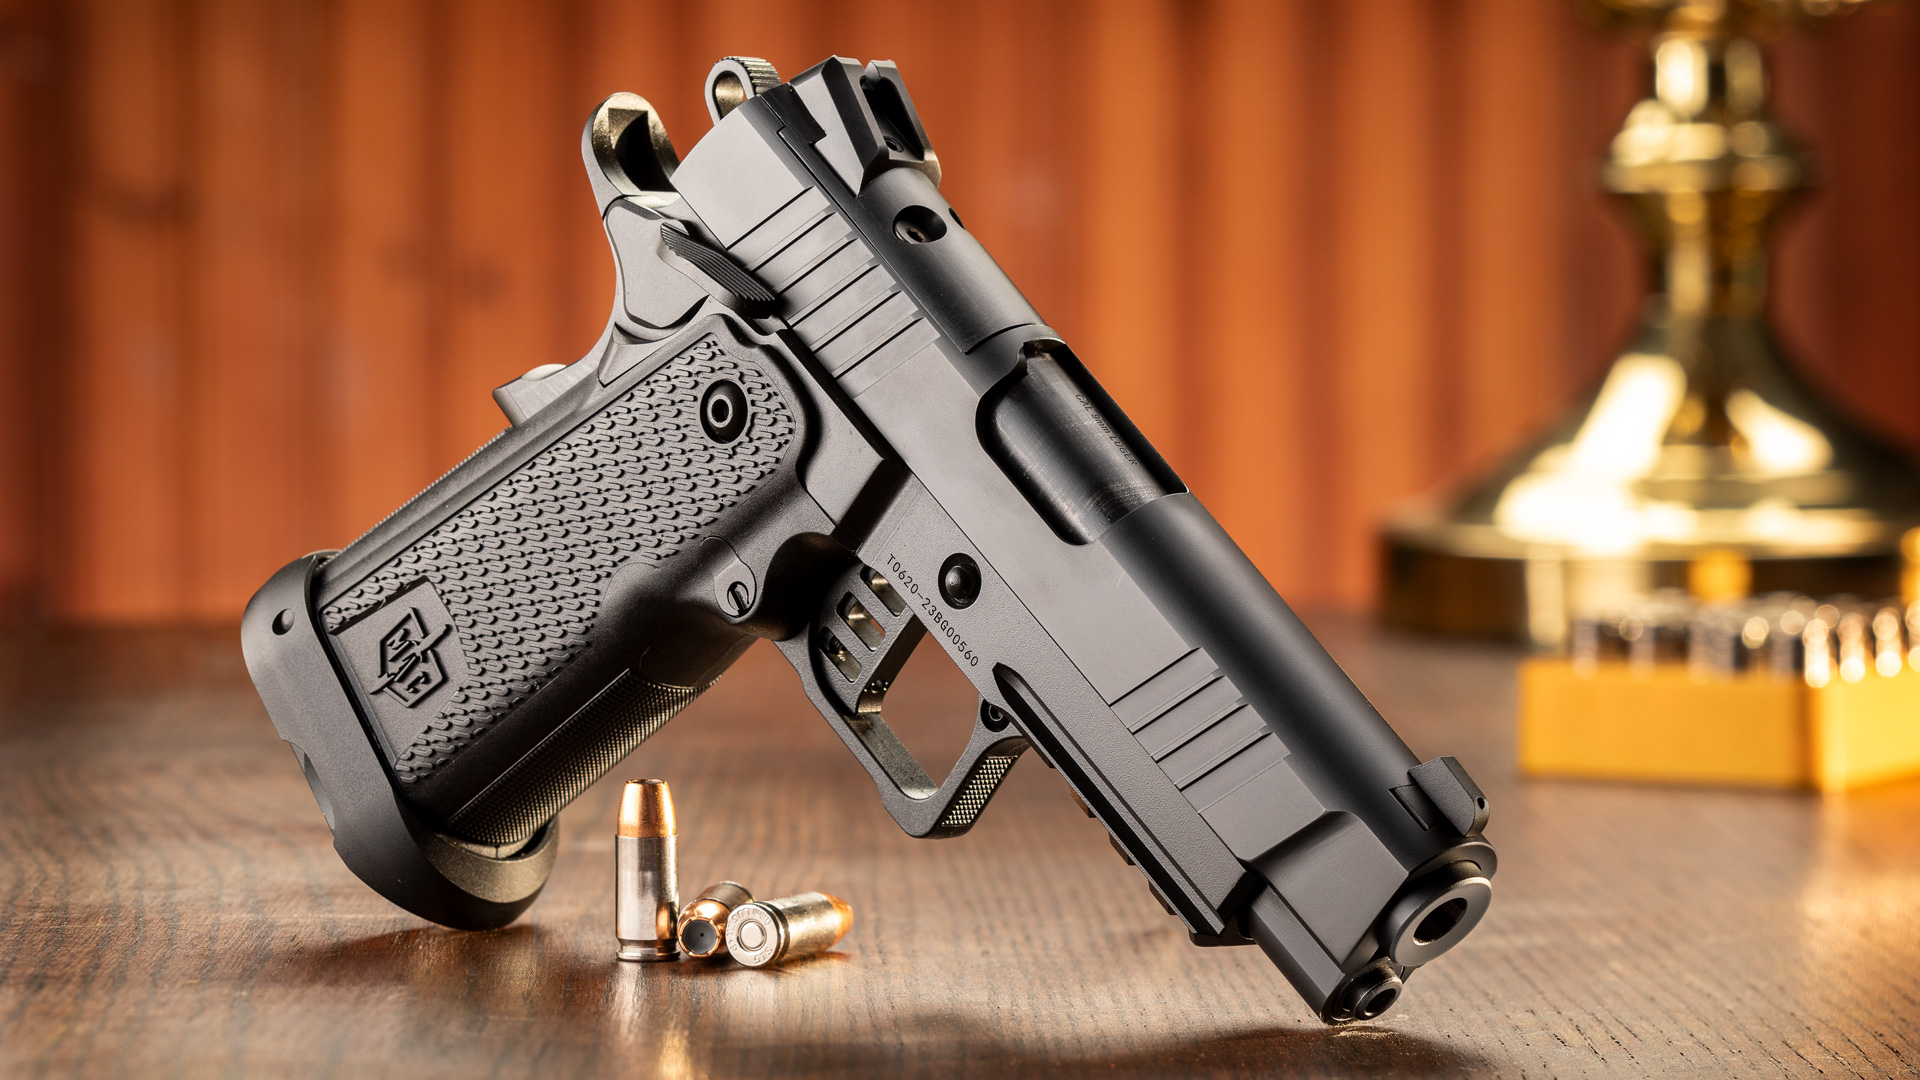 Heizer Defense Now Shipping the PKO-45 (Thinnest Single-Stack .45